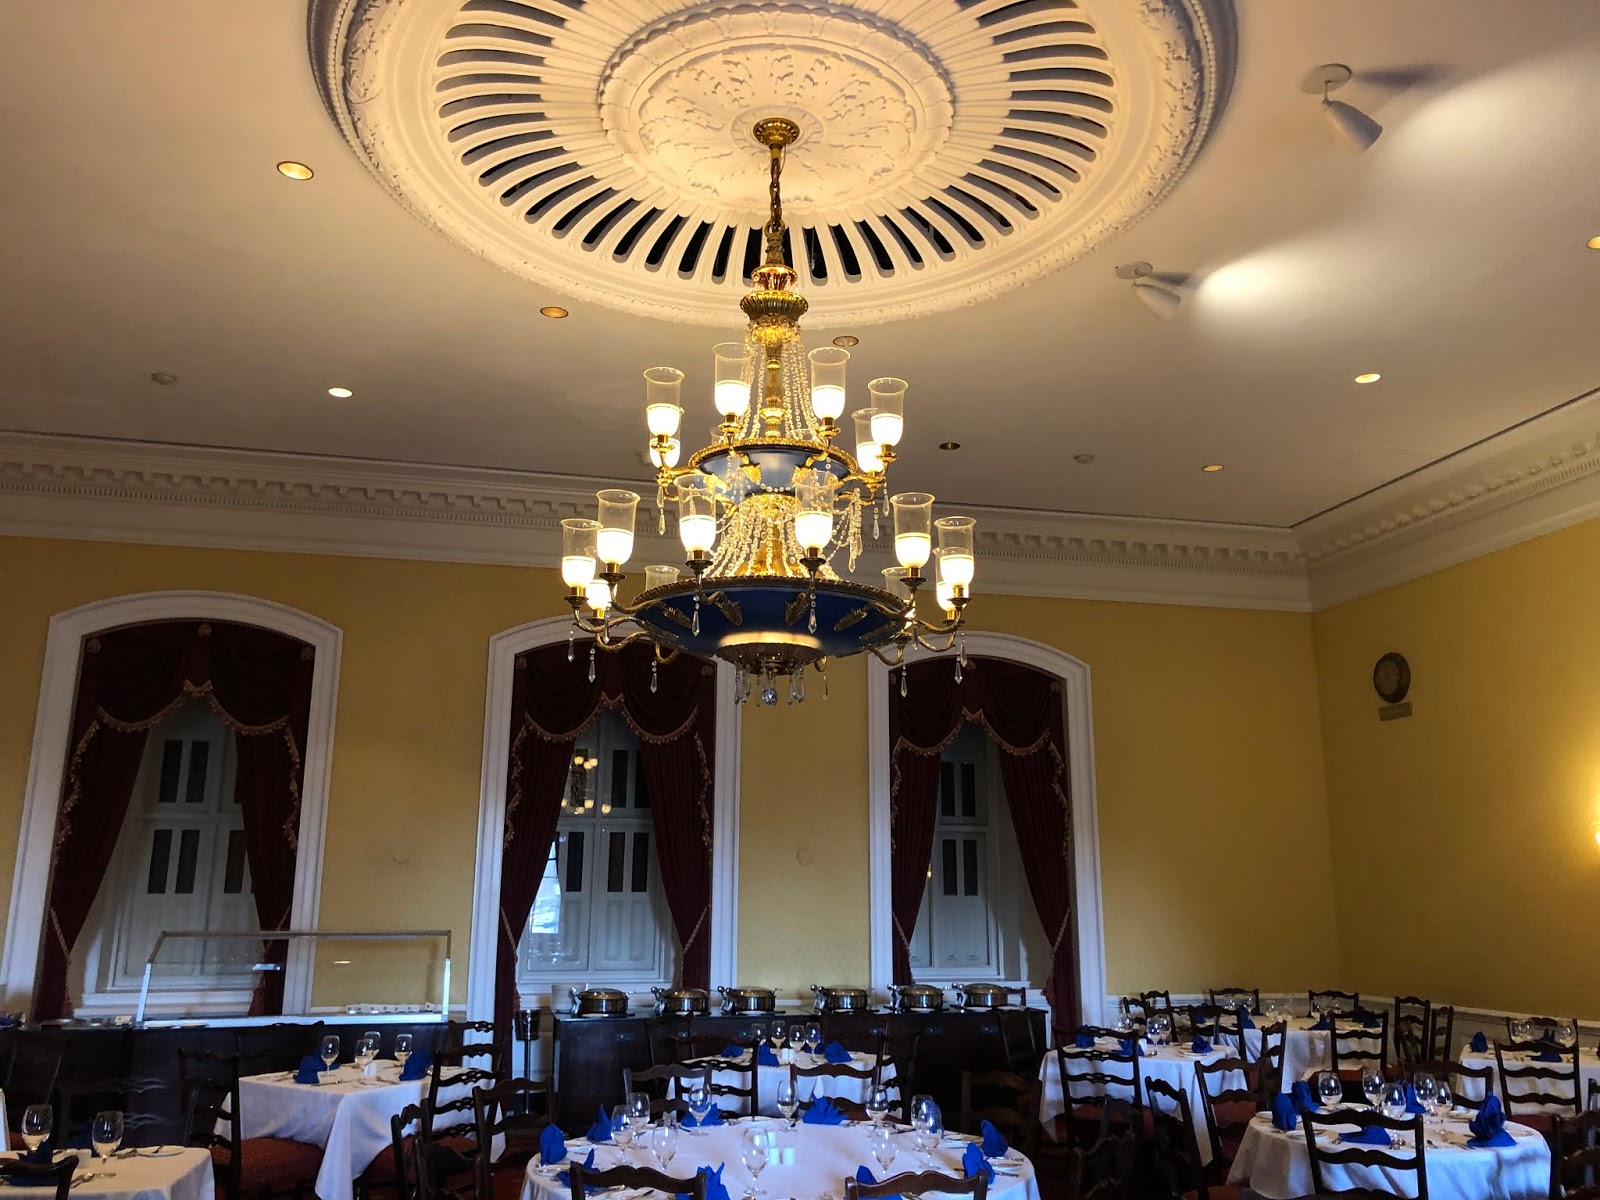 Us House Of Representatives Members Dining Room Costs